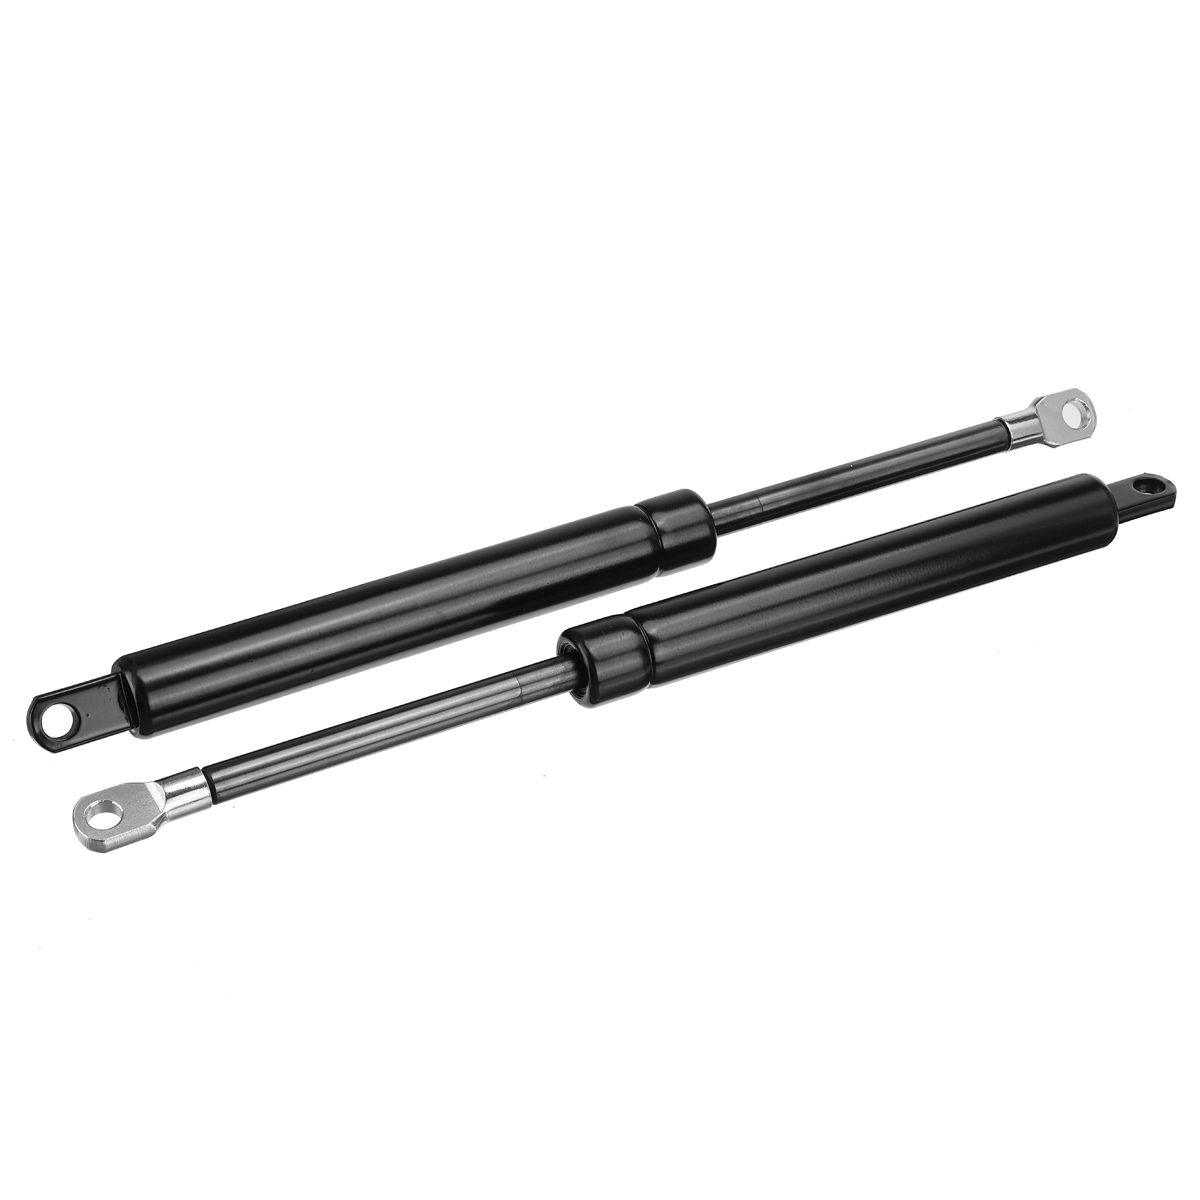 2Pcs-310-810mm-Extended-100-350-Compressed-Universal-800N-Force-Gas-Springs-Struts-Lifters-Supports--1777718-6